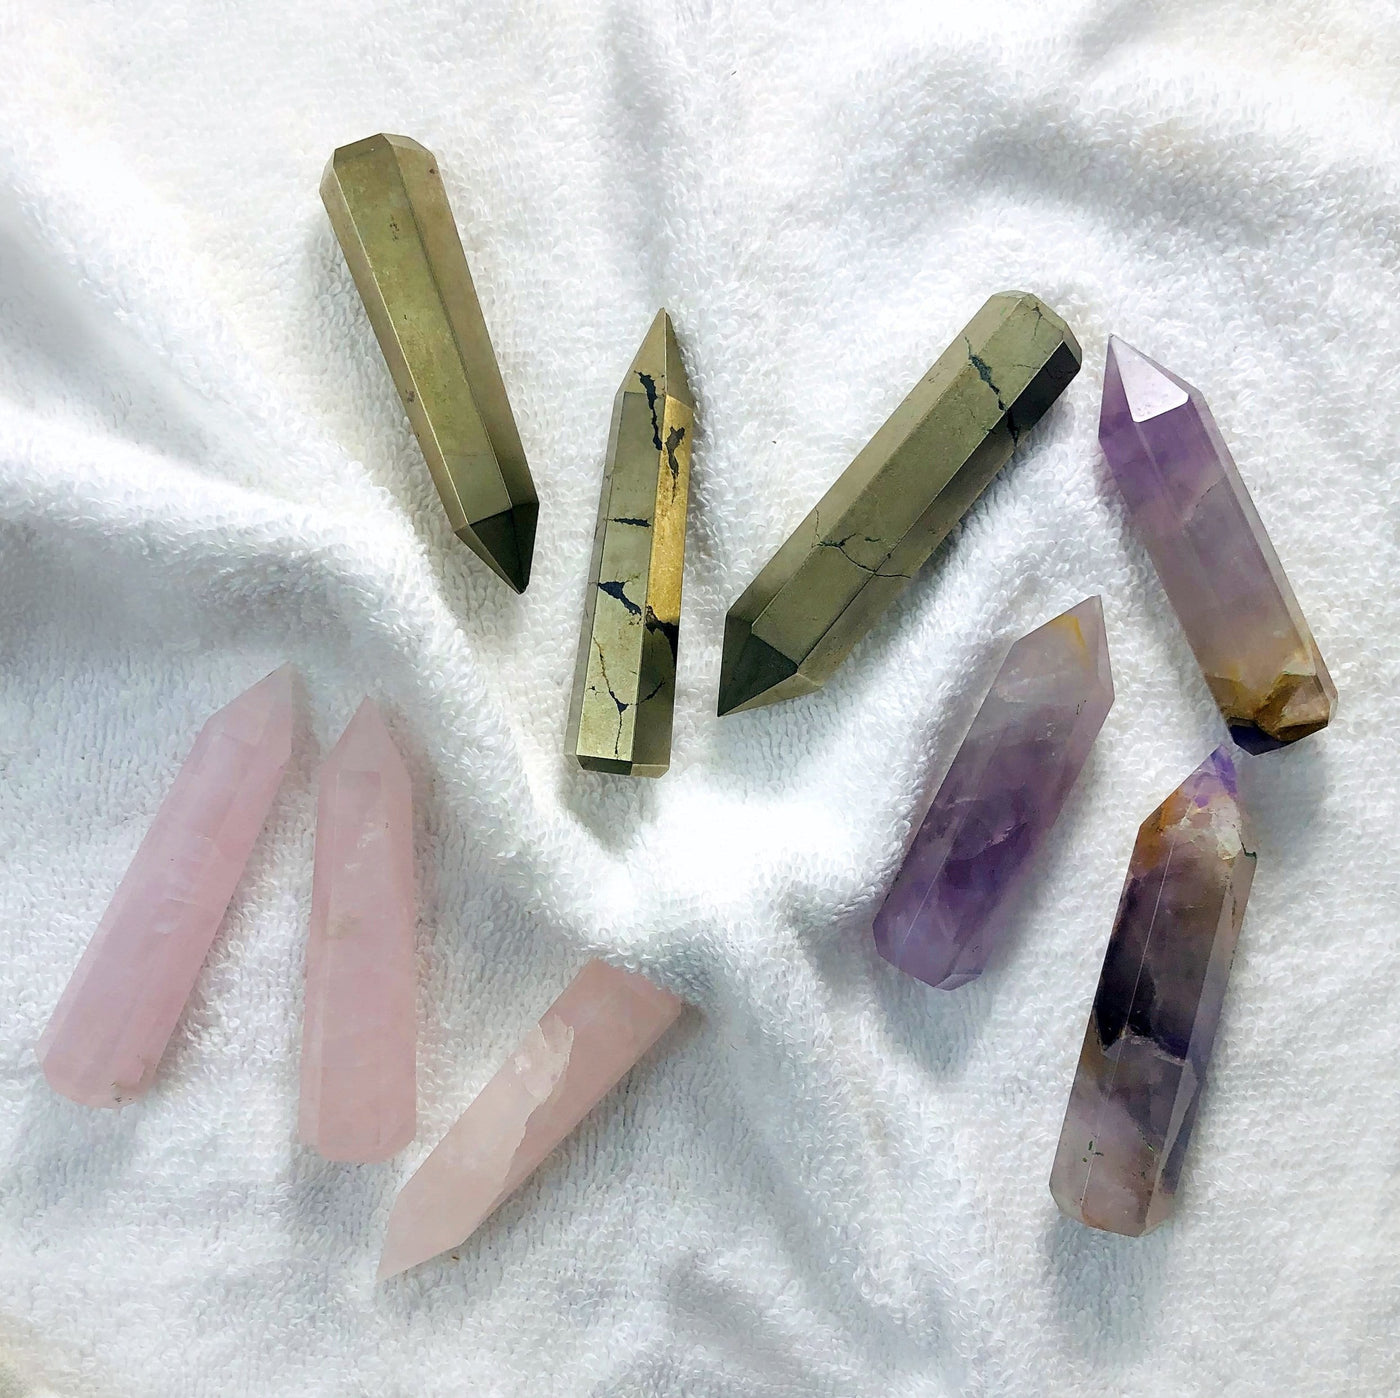 3 different colored Gemstone Pencil Polished Points displayed on white terry cloth